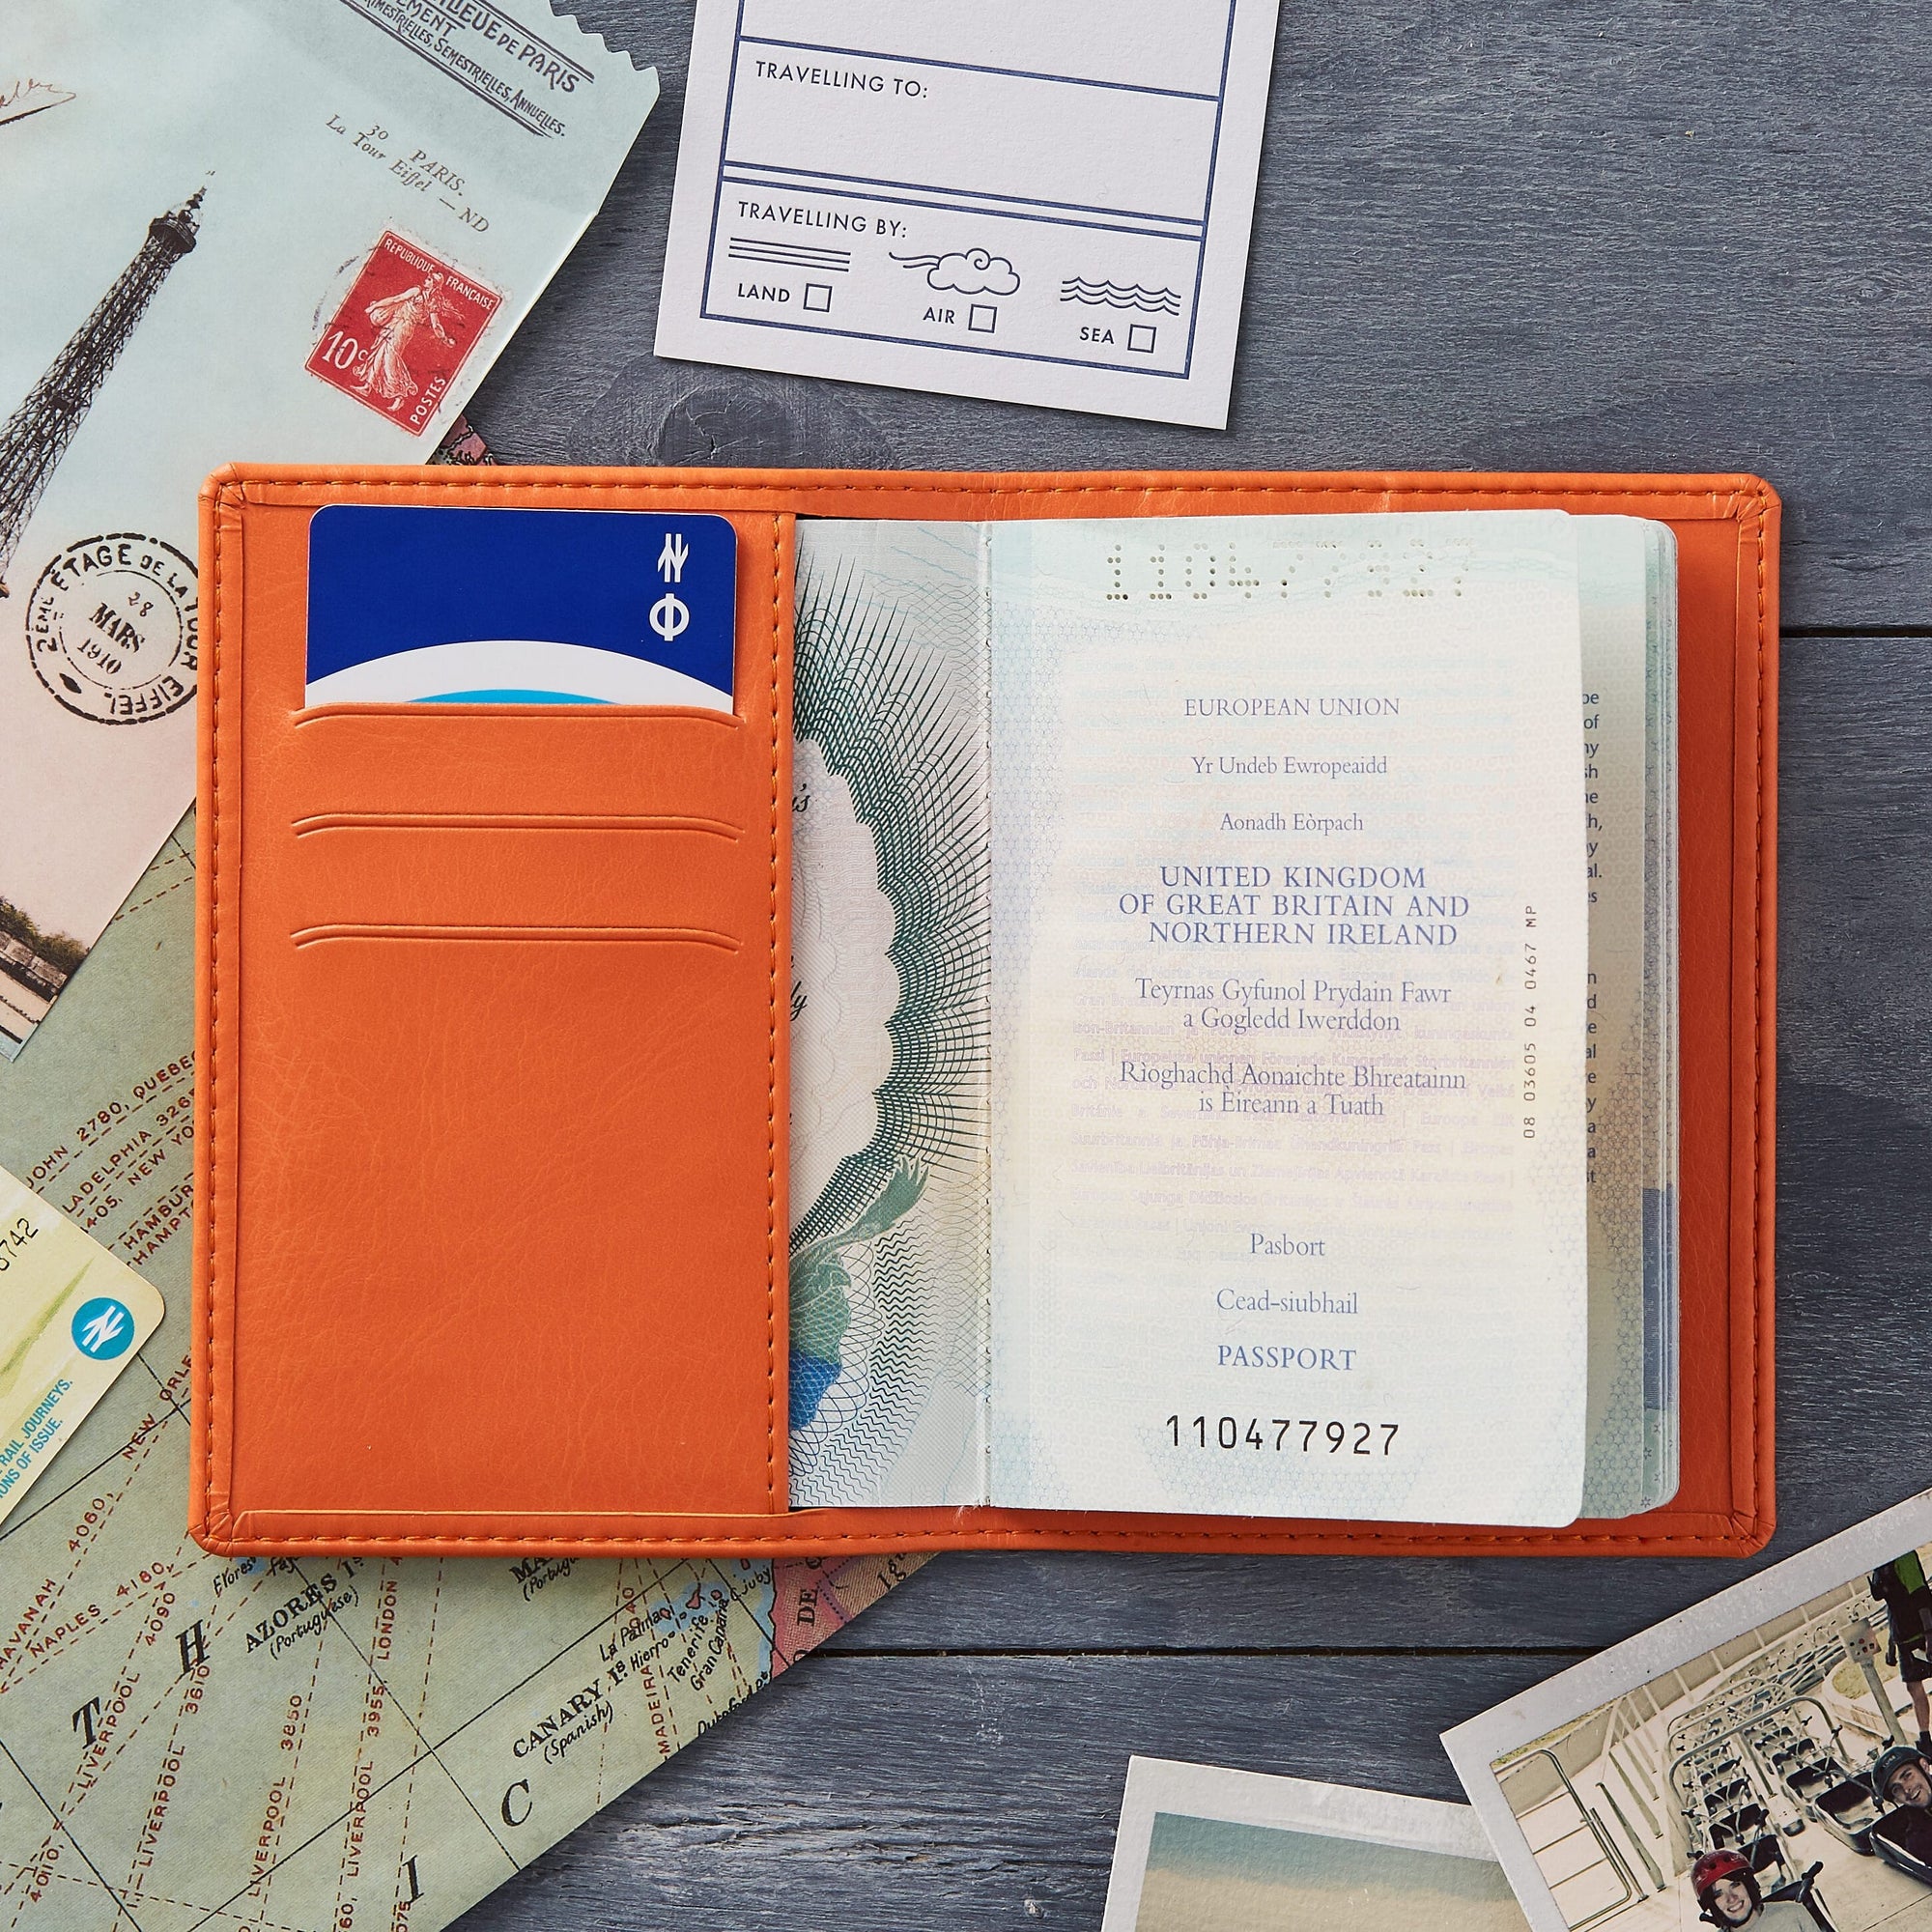 Passport holder lying flat open on table to show 3 card slots and the pocket holding a passport